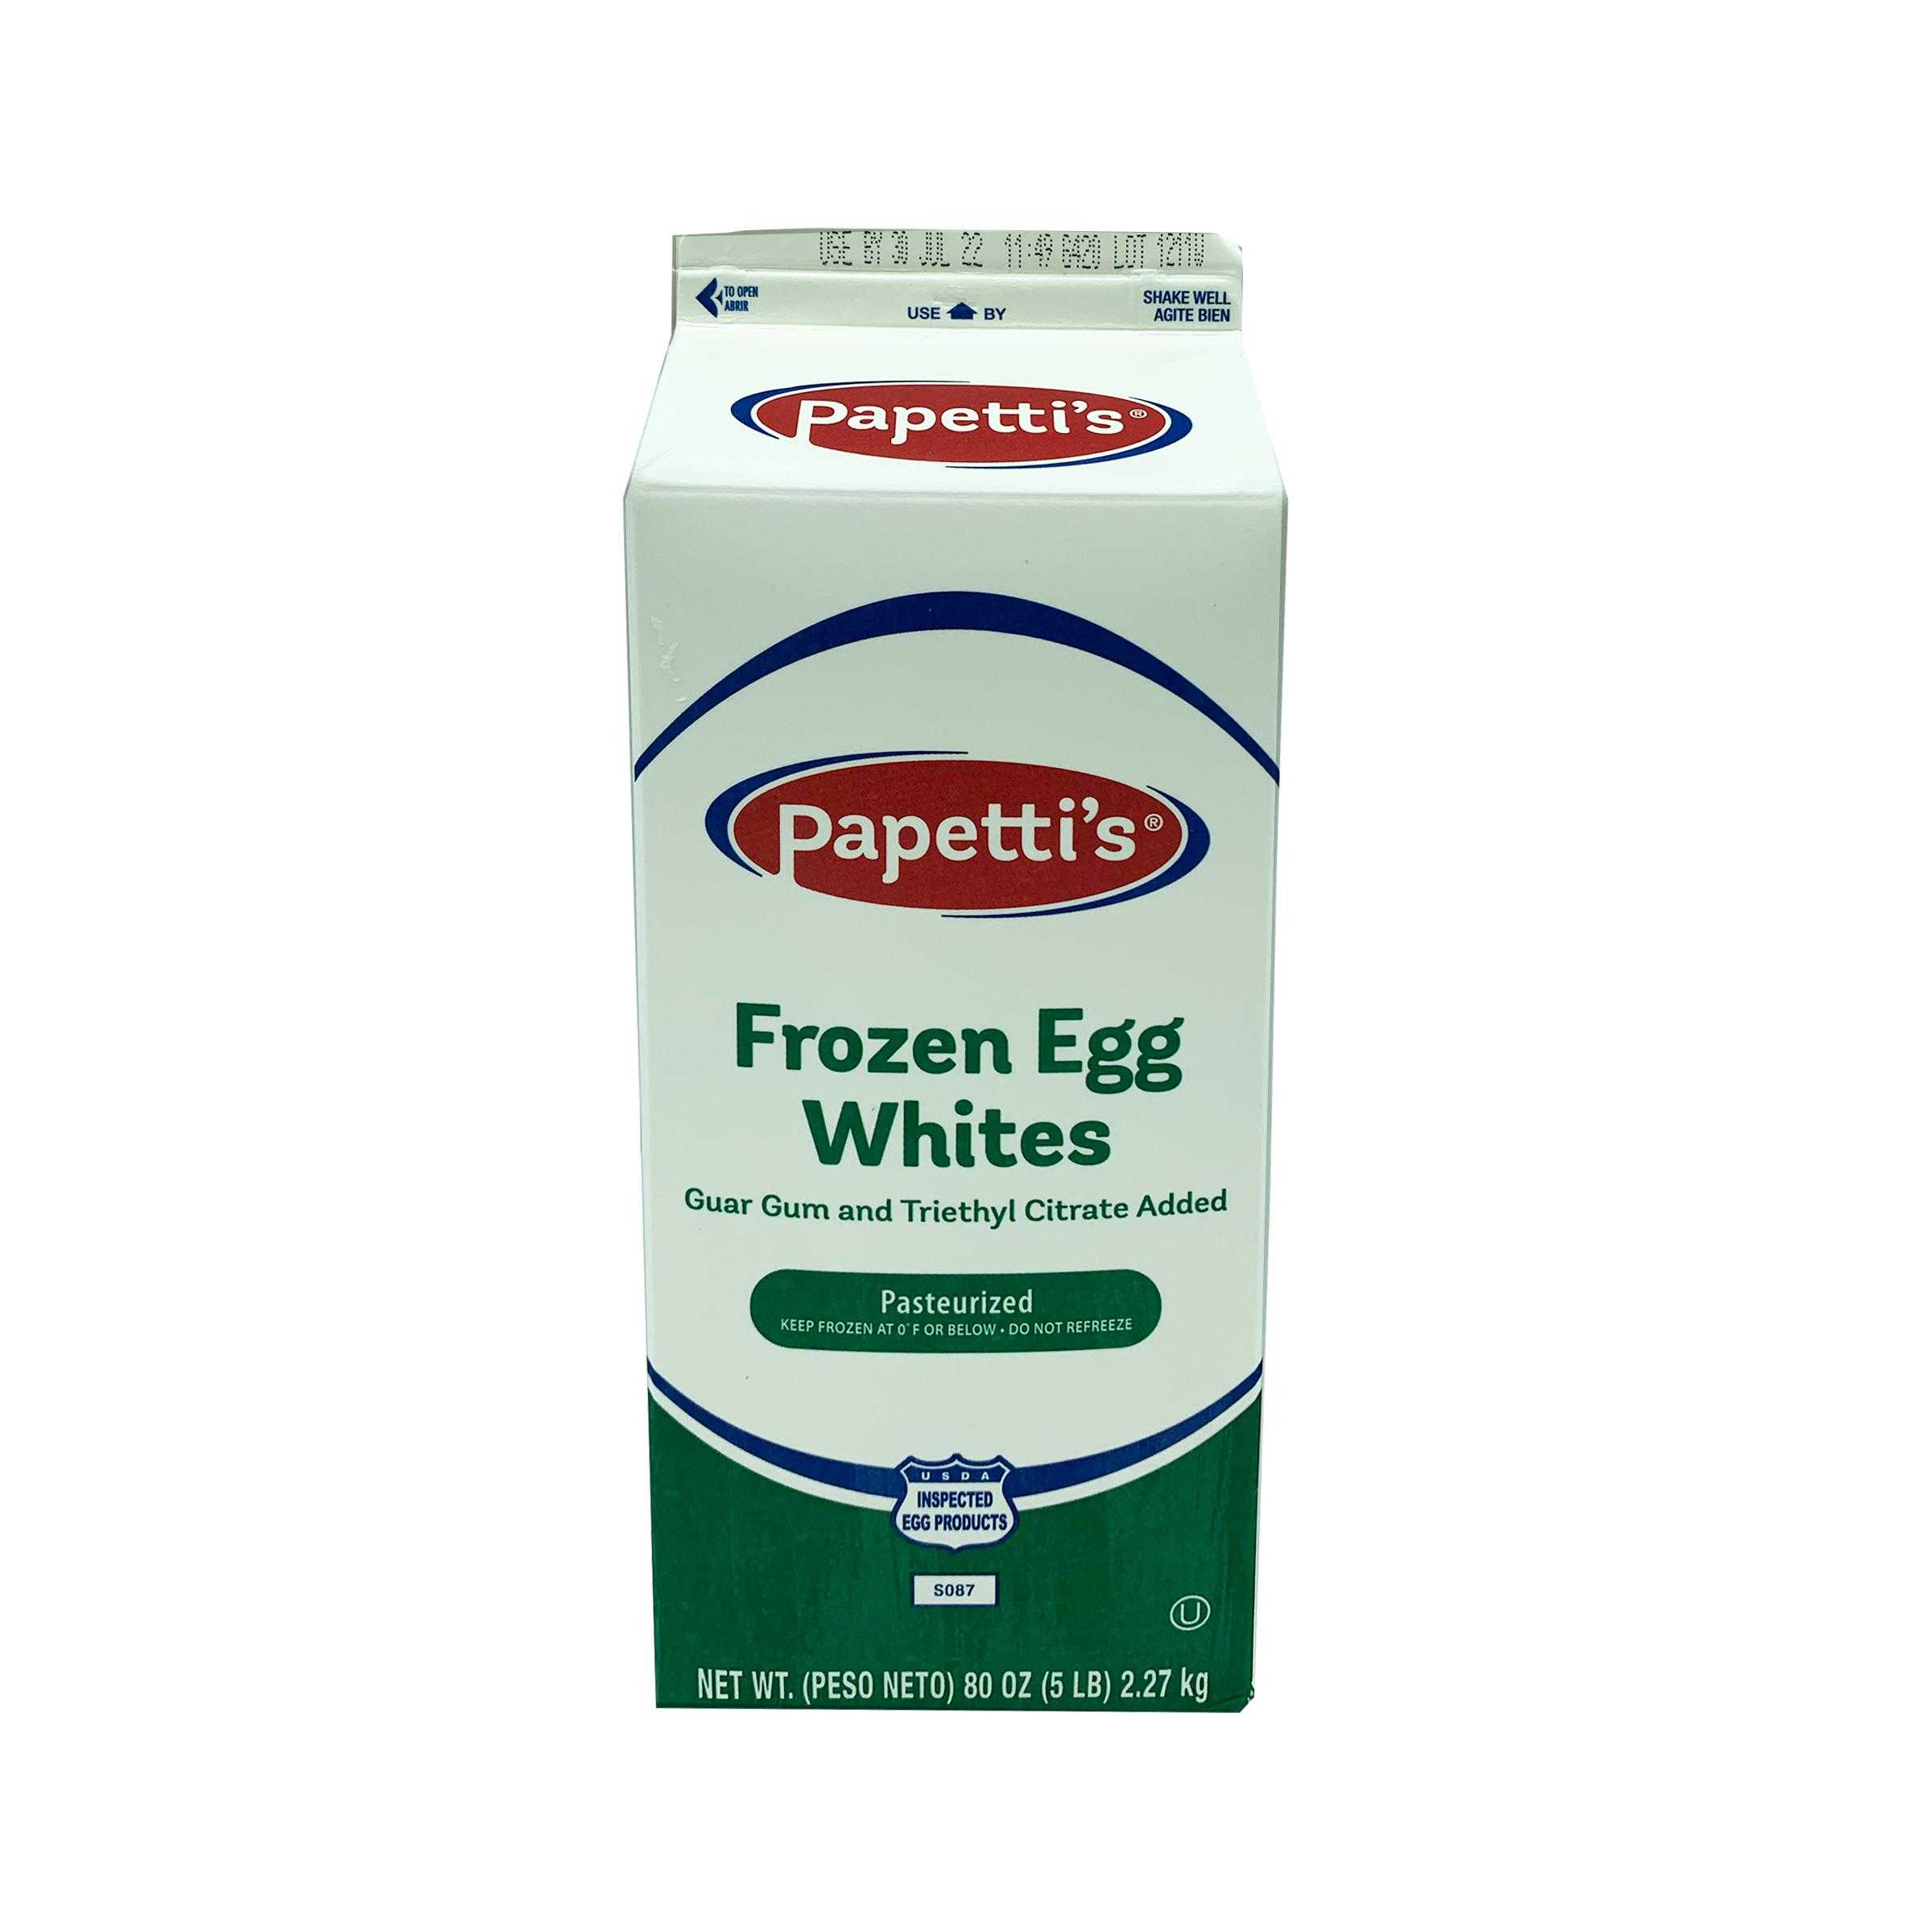 Papetti’s® Frozen Liquid Egg Whites with Triethyl Citrate and Guar Gum, 6/5 Lb Cartons